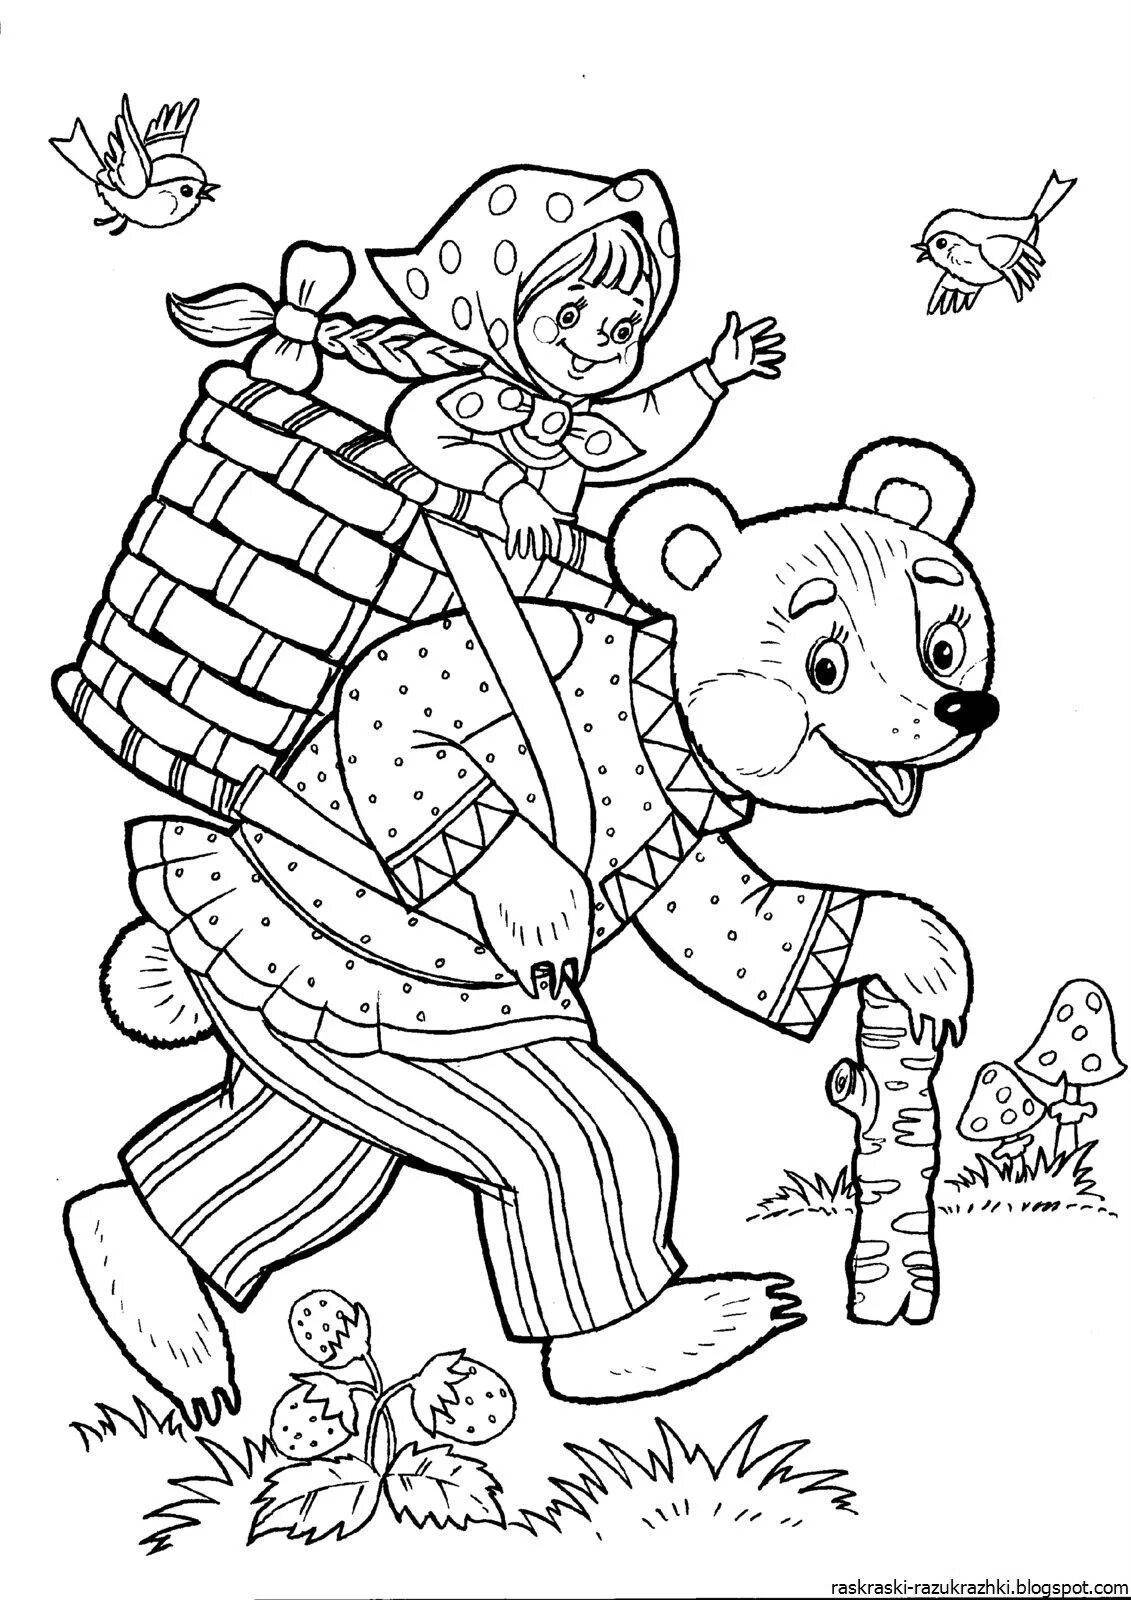 Coloring book for children 3-4 years old Russian folk tales